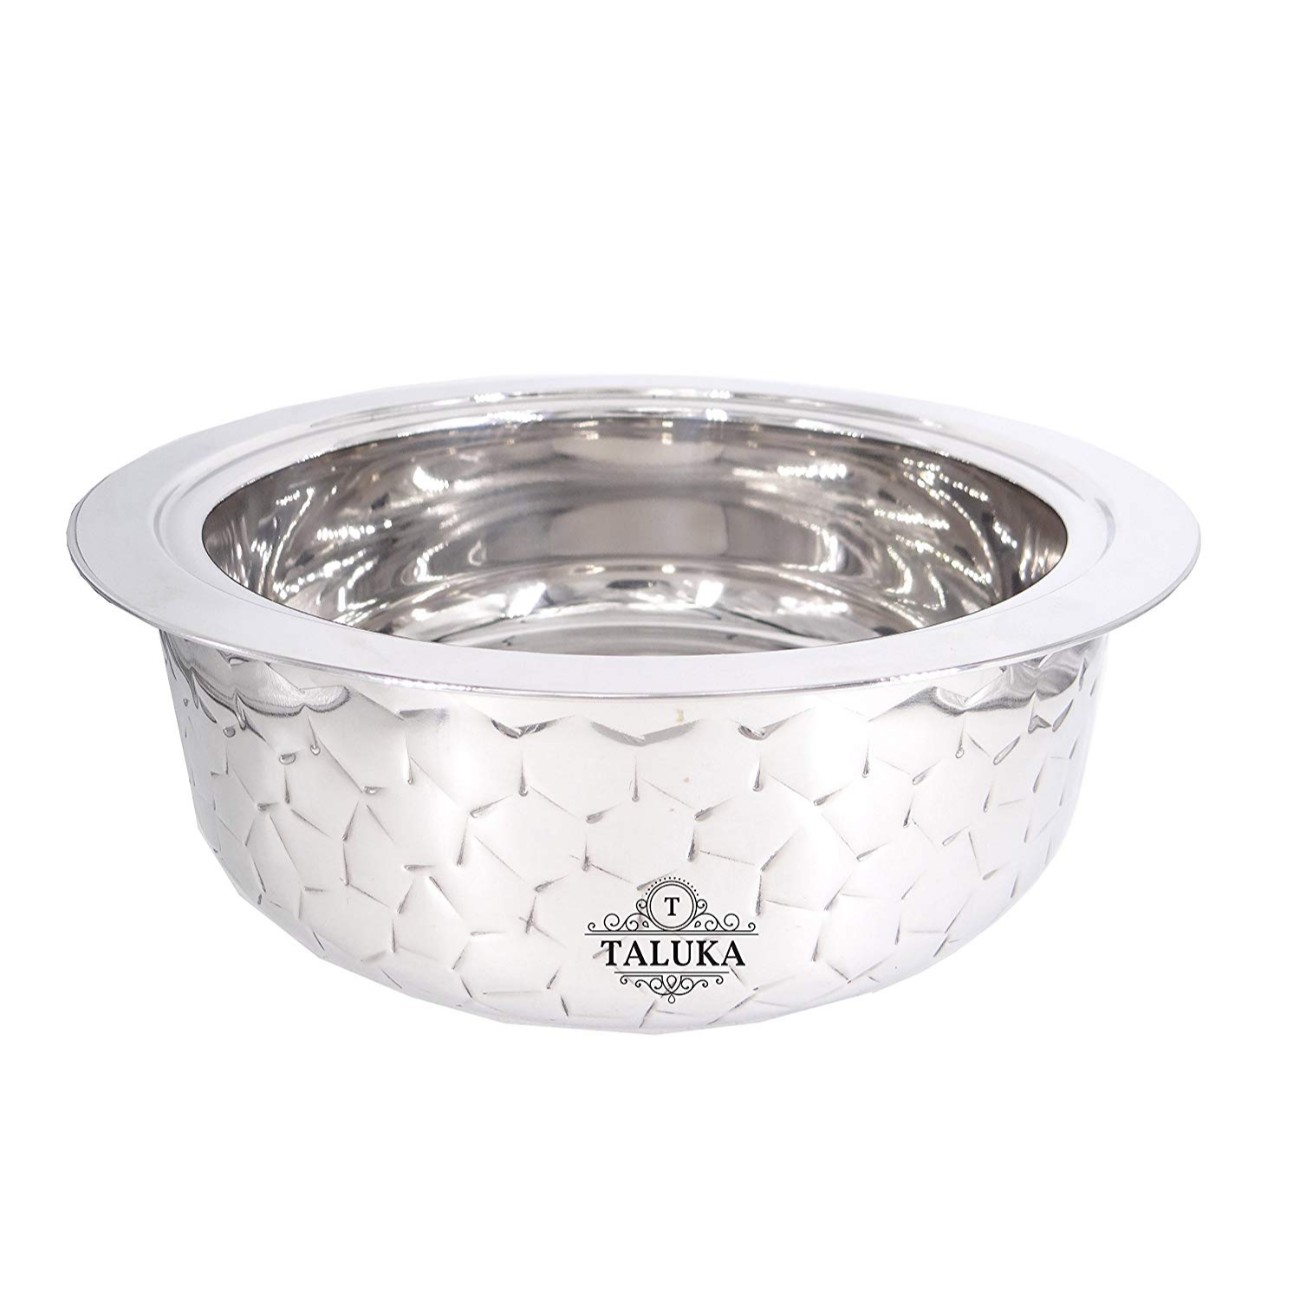 Stainless Steel Insulated Chapati Box Double Wall Hammered Serving Casserole